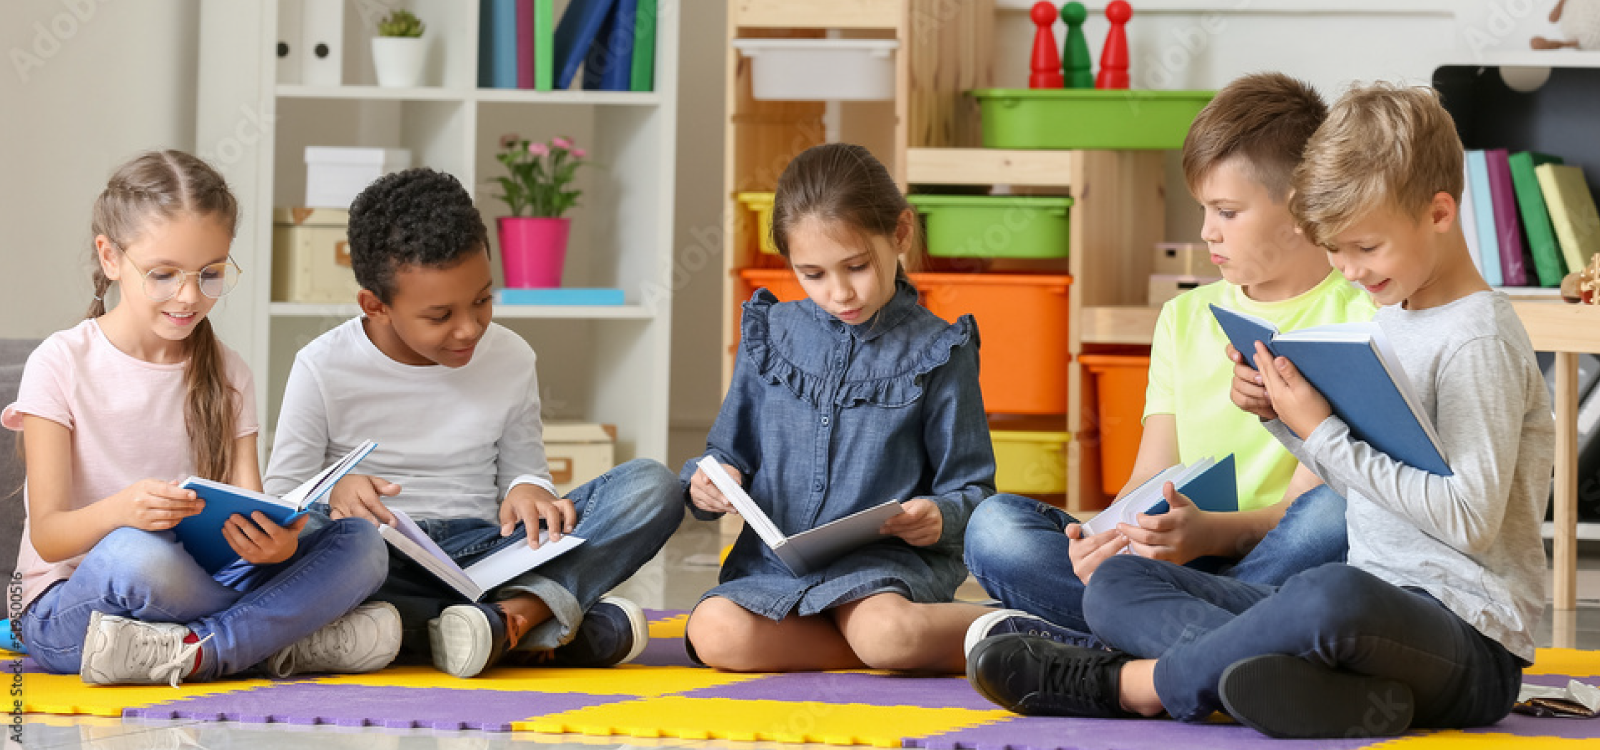 A group of toddlers are sitting on the floor, all holding a book and reading it together.